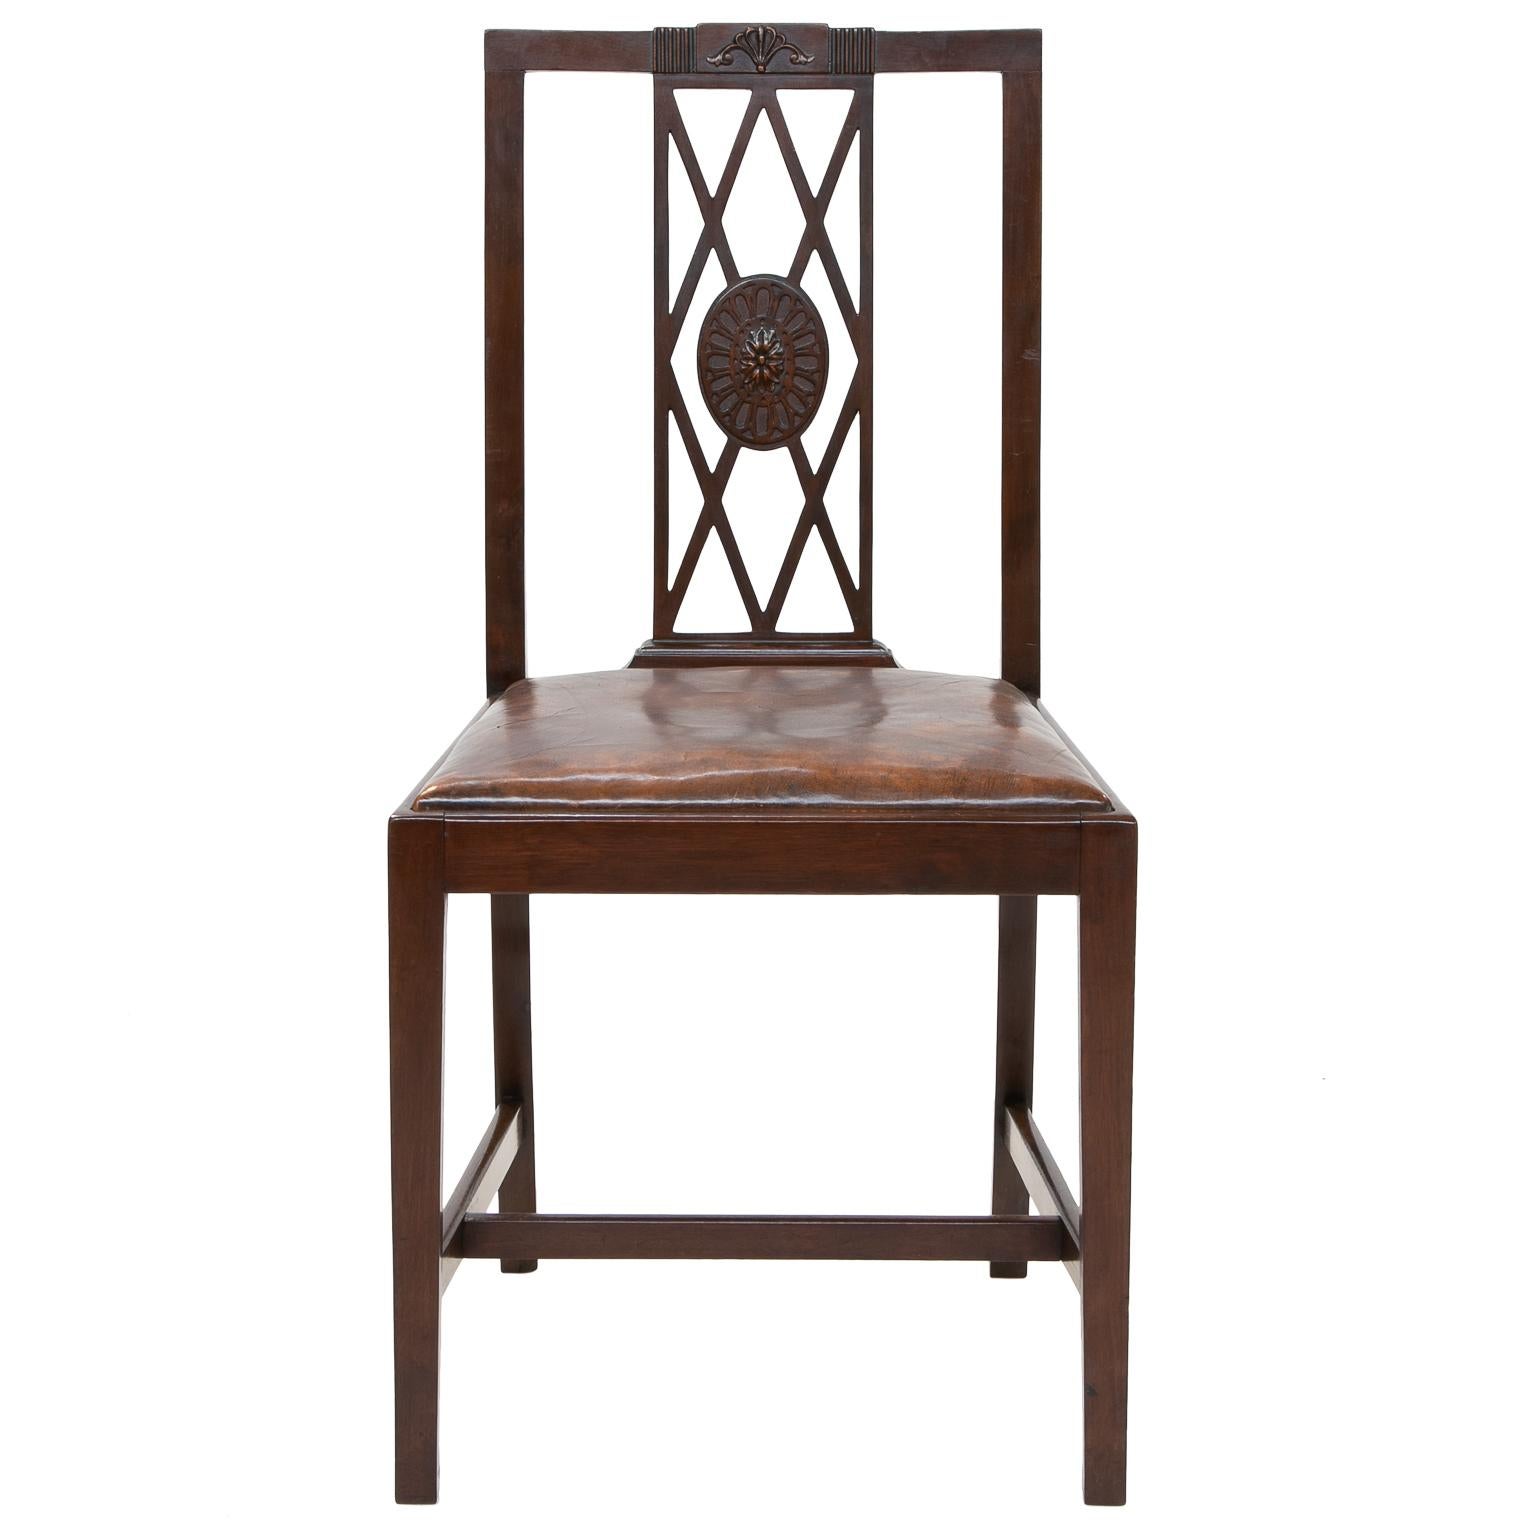 Set of 6 English mahogany side chairs
Set of 6 English mahogany side chairs with leather seats, H-stretcher, straight legs, and rectangular backs with pierced diamond shapes, center medallion and carved crest on the chair, circa 1930s.